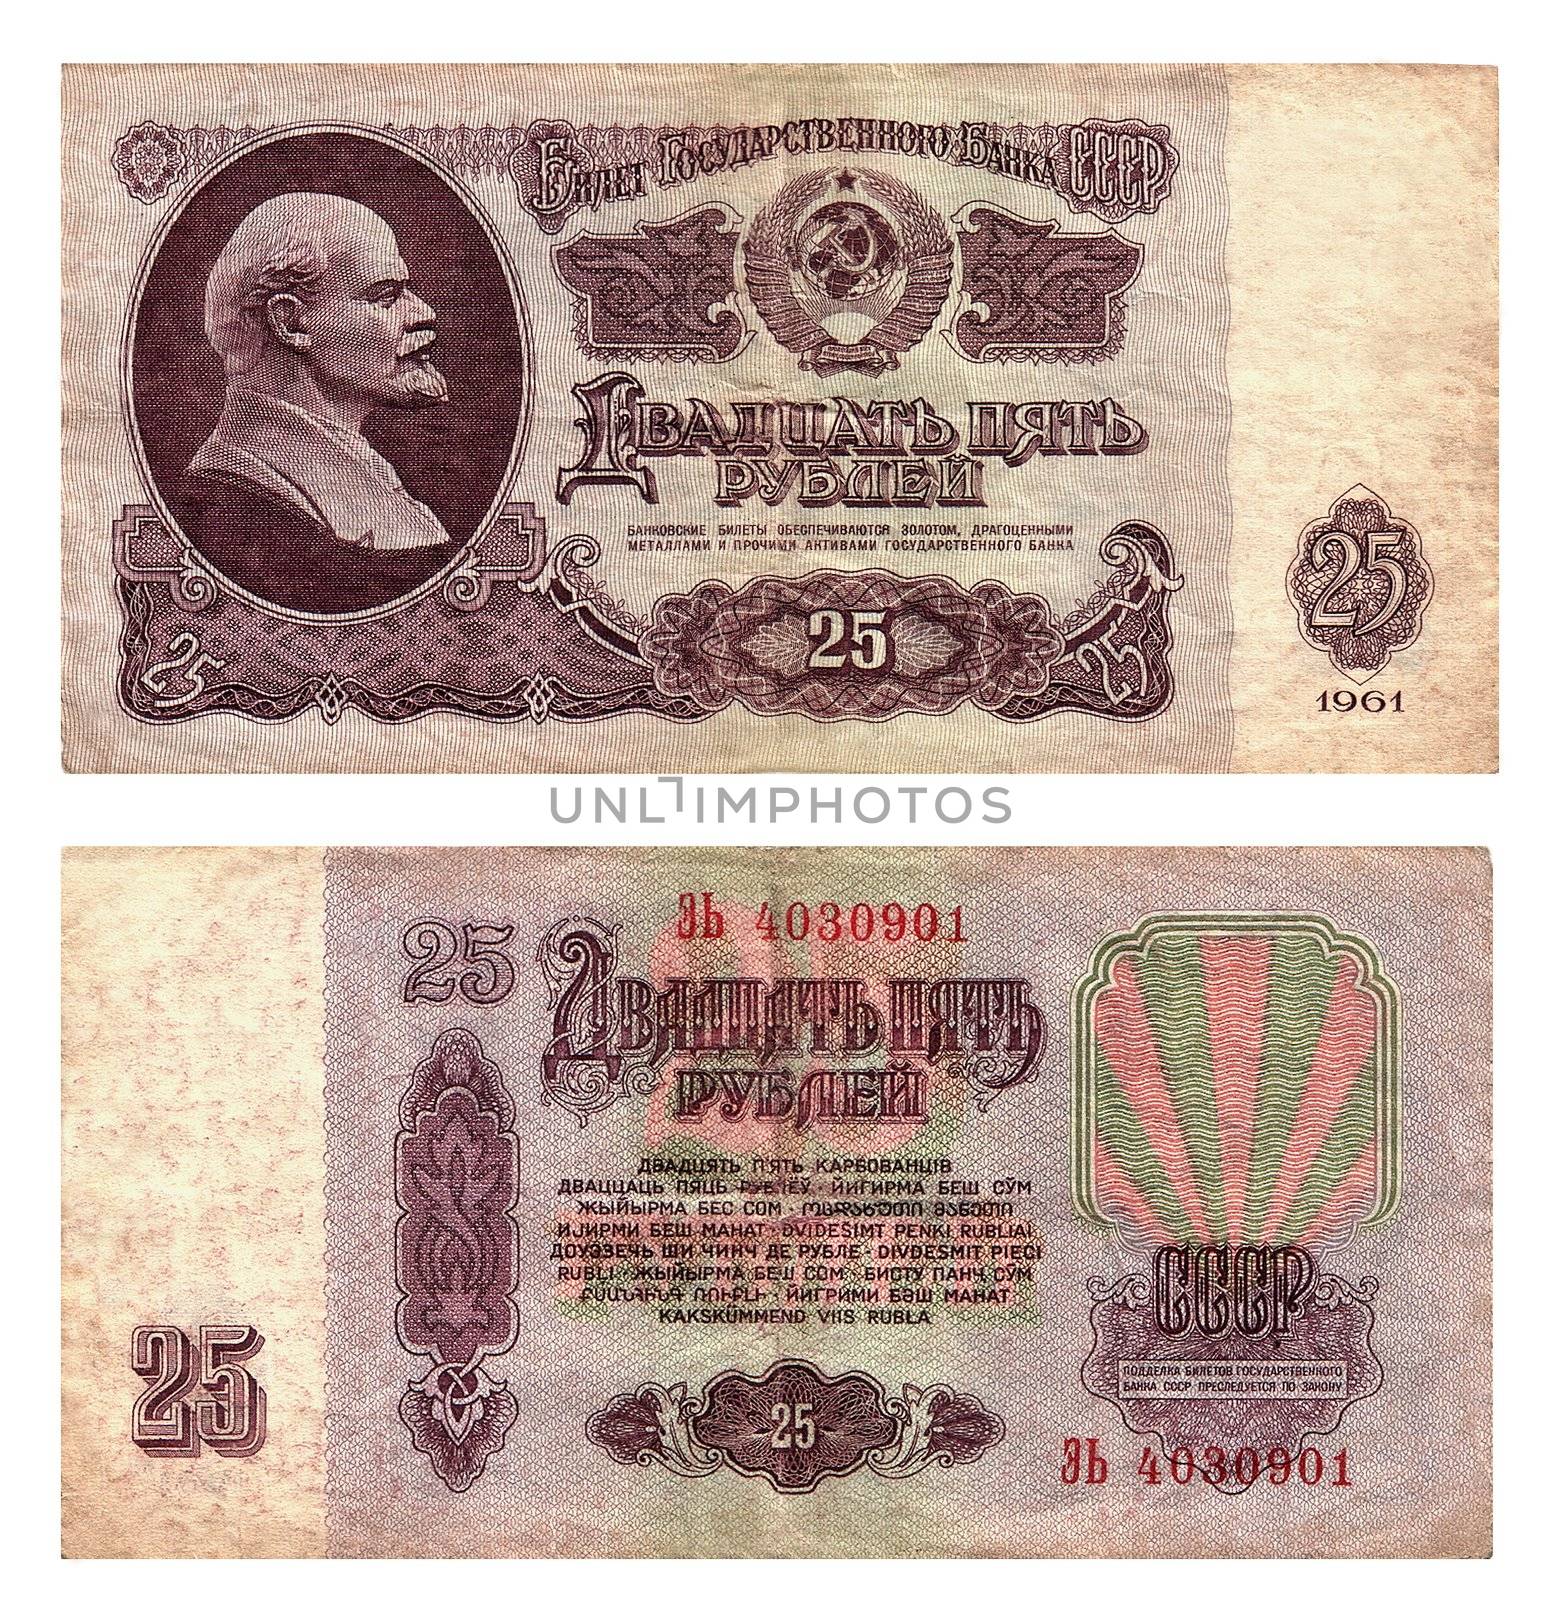 Paper money face value 25 rouble of old design
